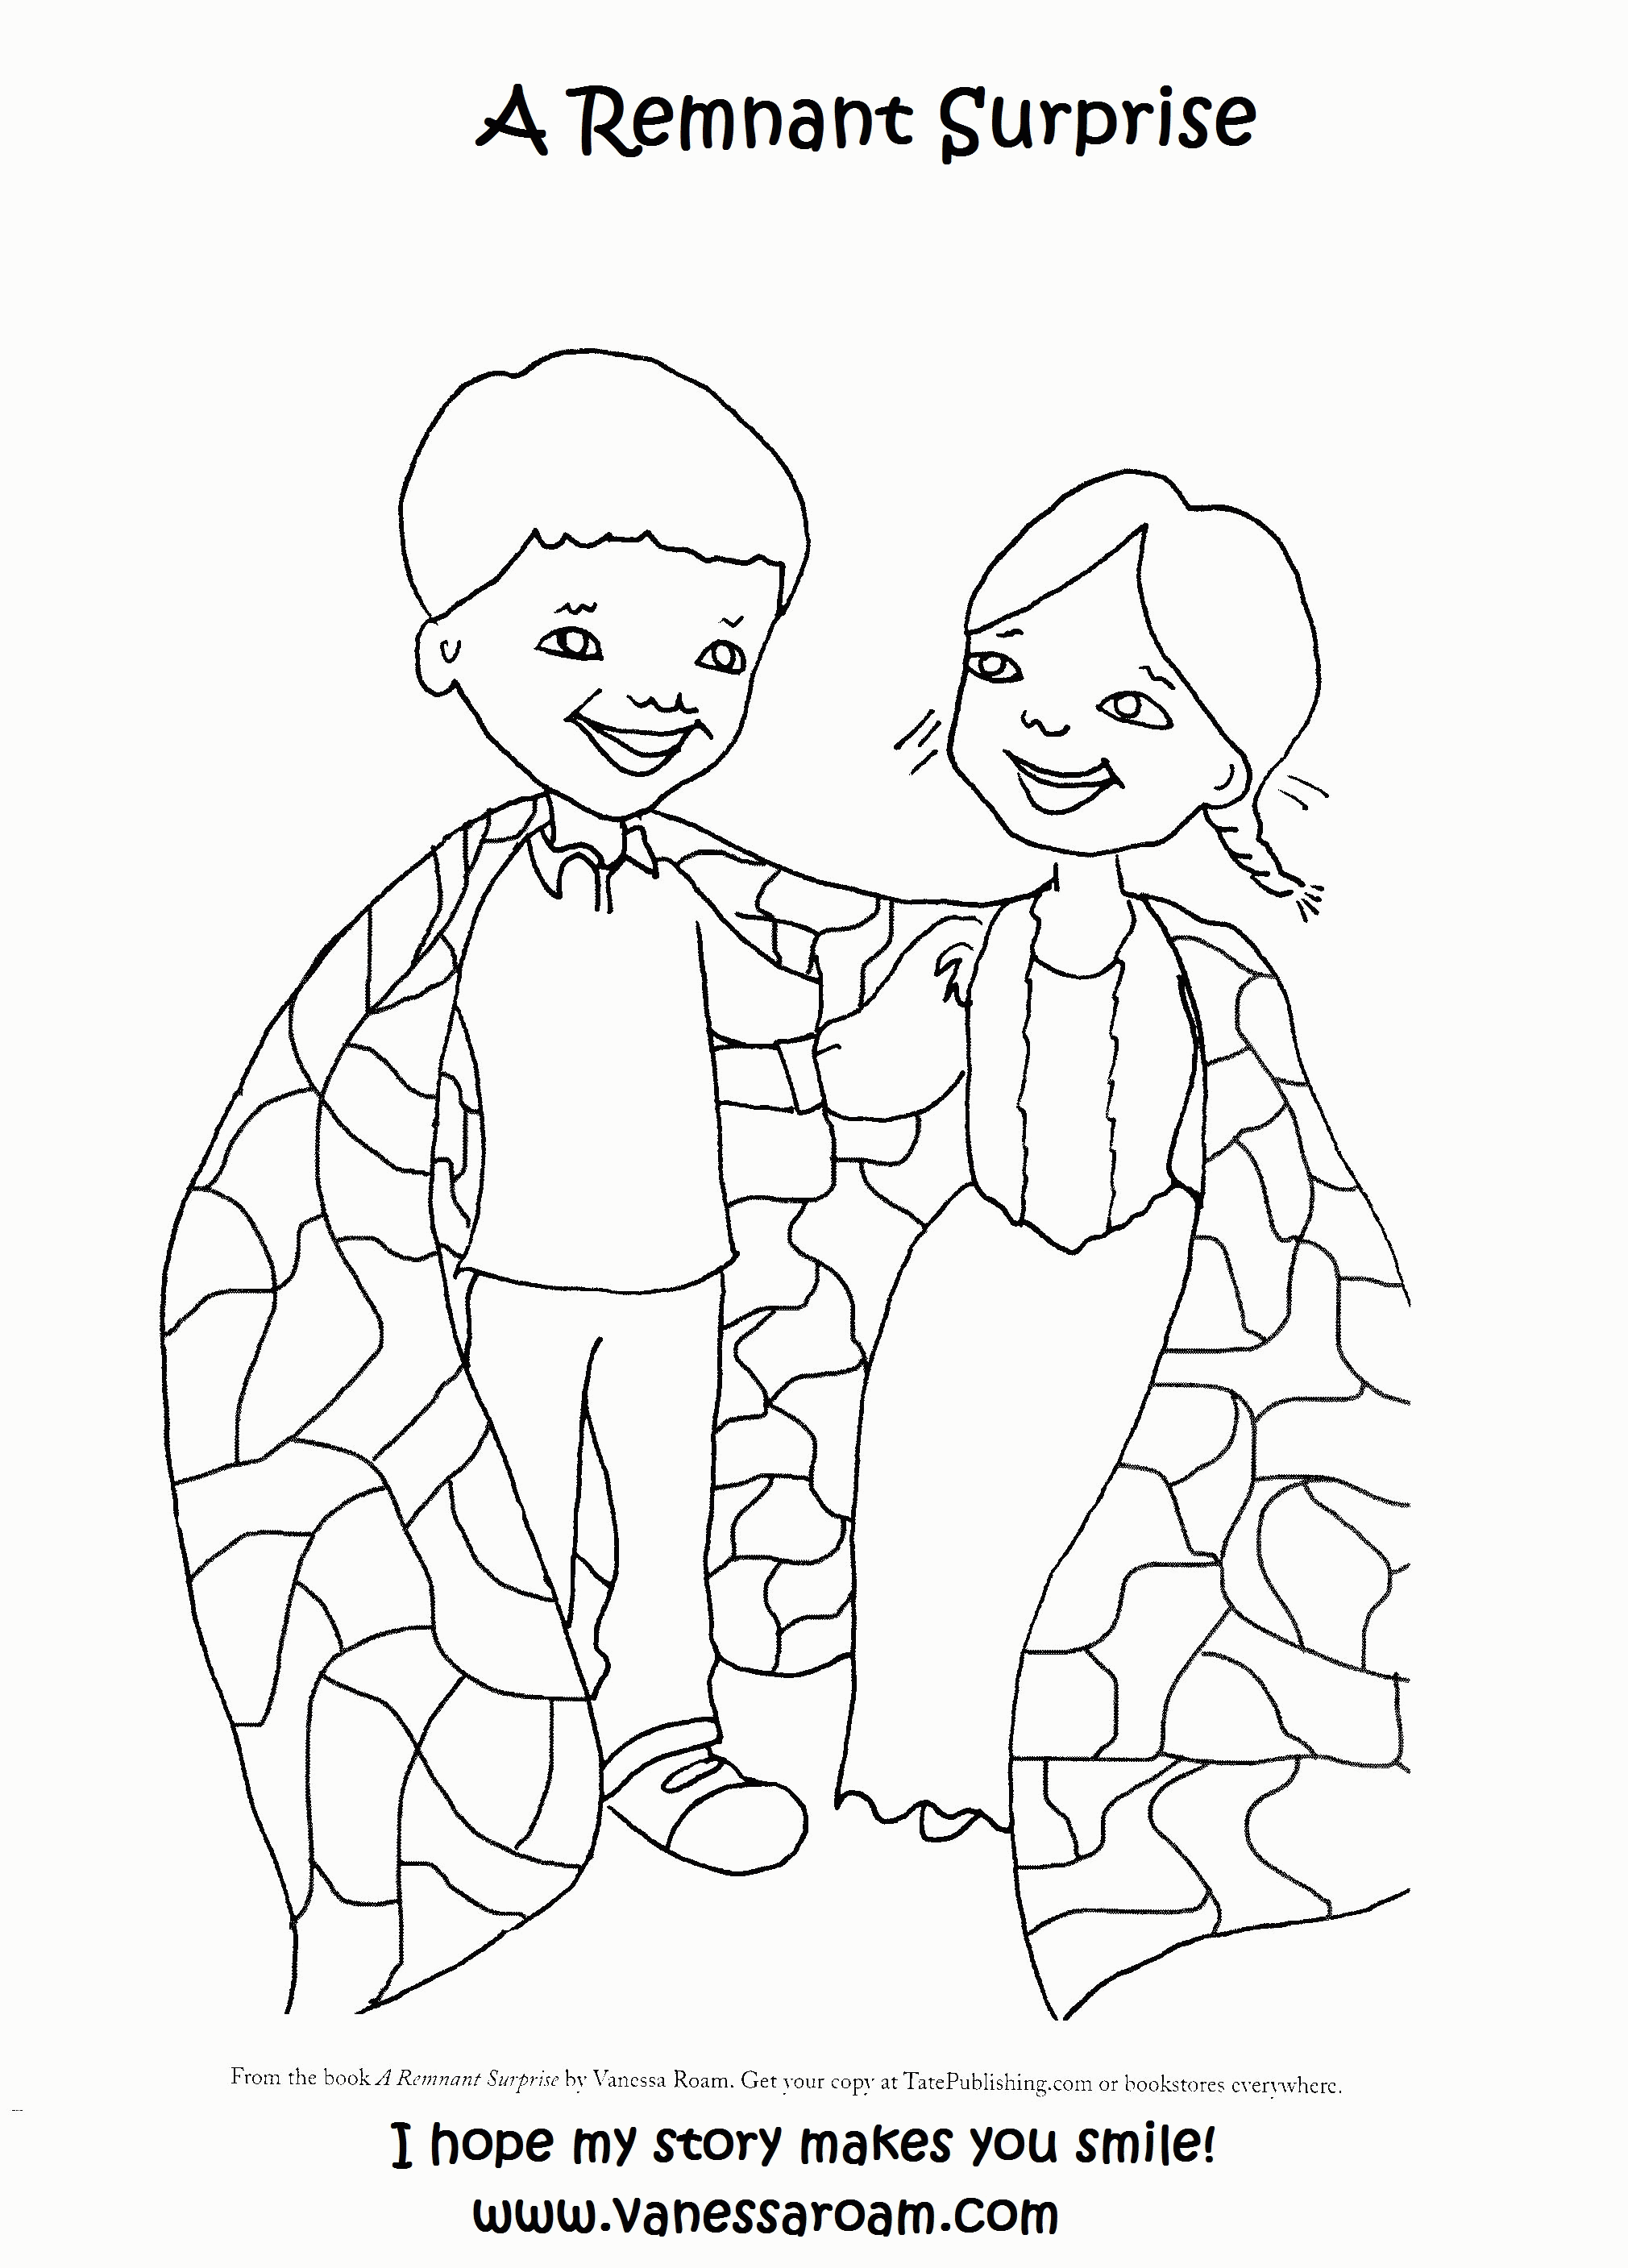 kindness-free-printable-coloring-page-download-print-or-color-online